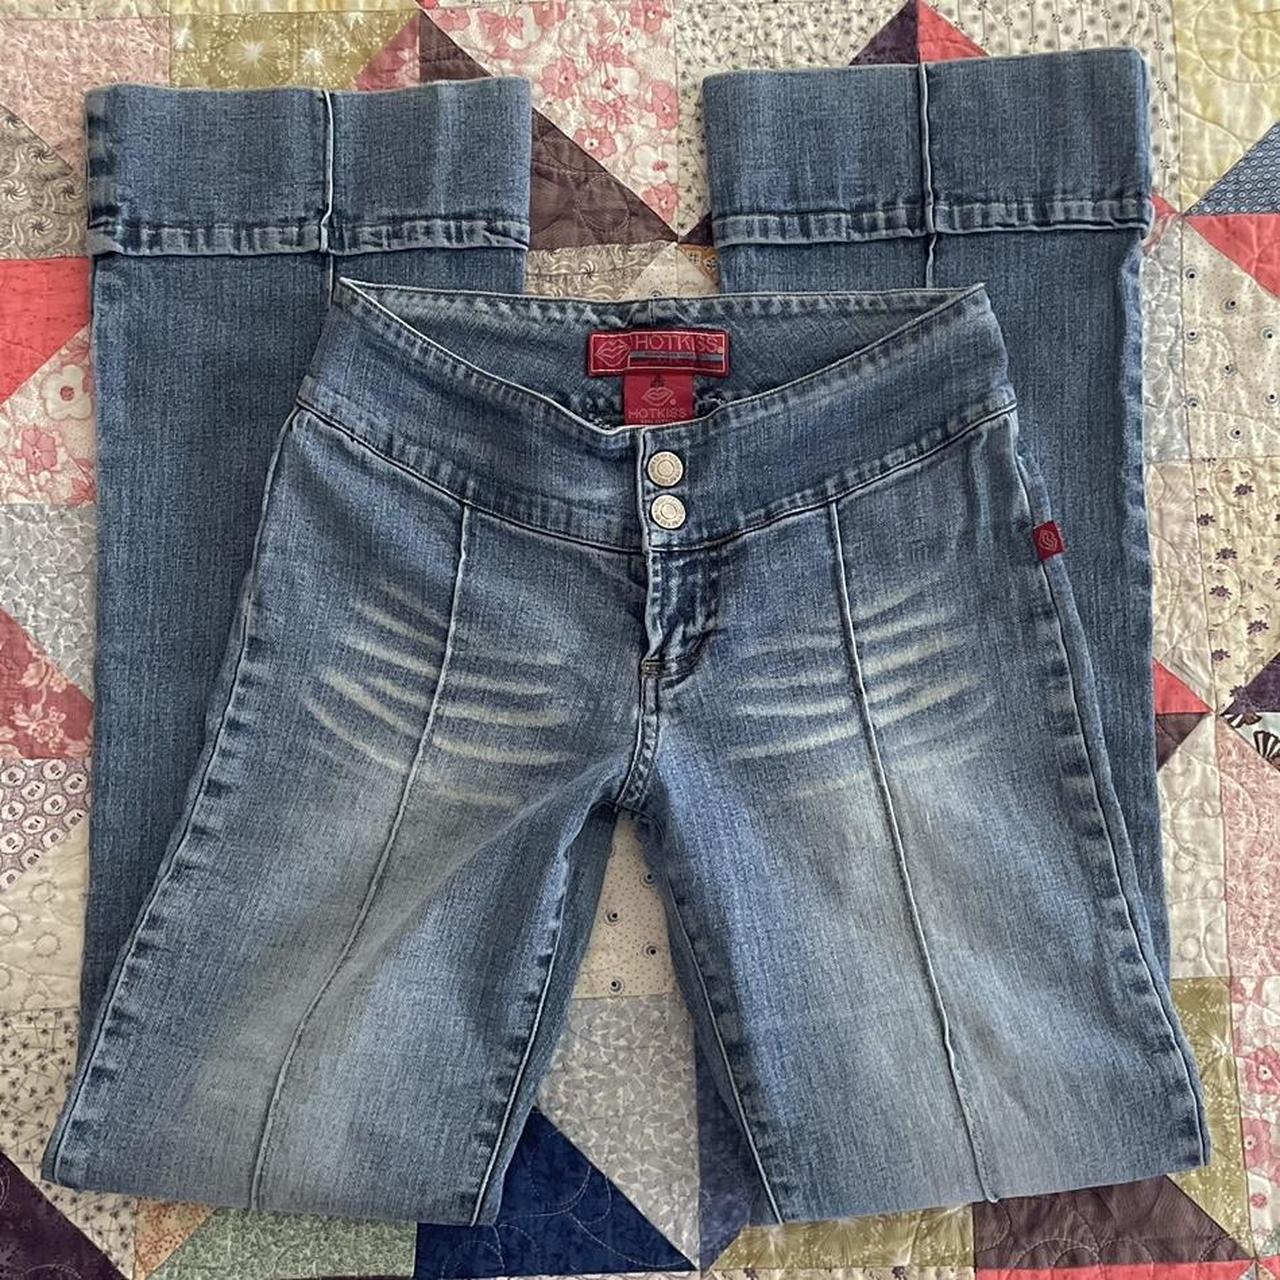 Hot Kiss flare jeans Excellent condition Stretchy... - Depop